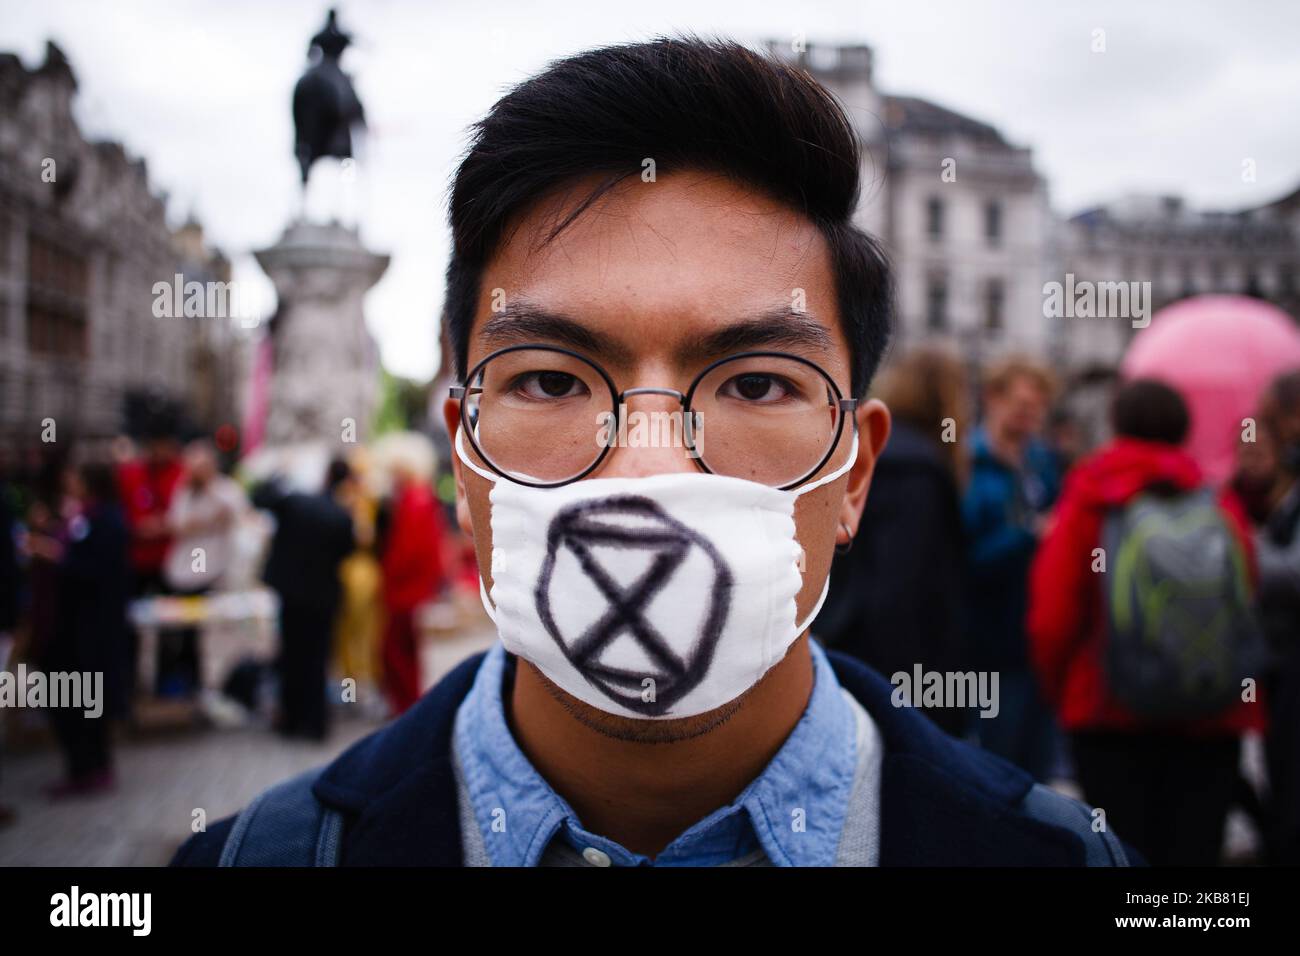 A member of climate change activist movement Extinction Rebellion (XR), wearing a face mask bearing the group's hourglass logo, poses for a picture in Trafalgar Square on the fourth day of the group's two-week 'International Rebellion' in London, England, on October 10, 2019. By lunchtime Thursday police had all but contained the demonstrations in Trafalgar Square and the roadways around it, where sizeable numbers of XR followers remained. A hearse carrying a coffin for 'Our Future', which had been parked at the Whitehall exit from the square since Monday, was removed early afternoon. (Photo b Stock Photo